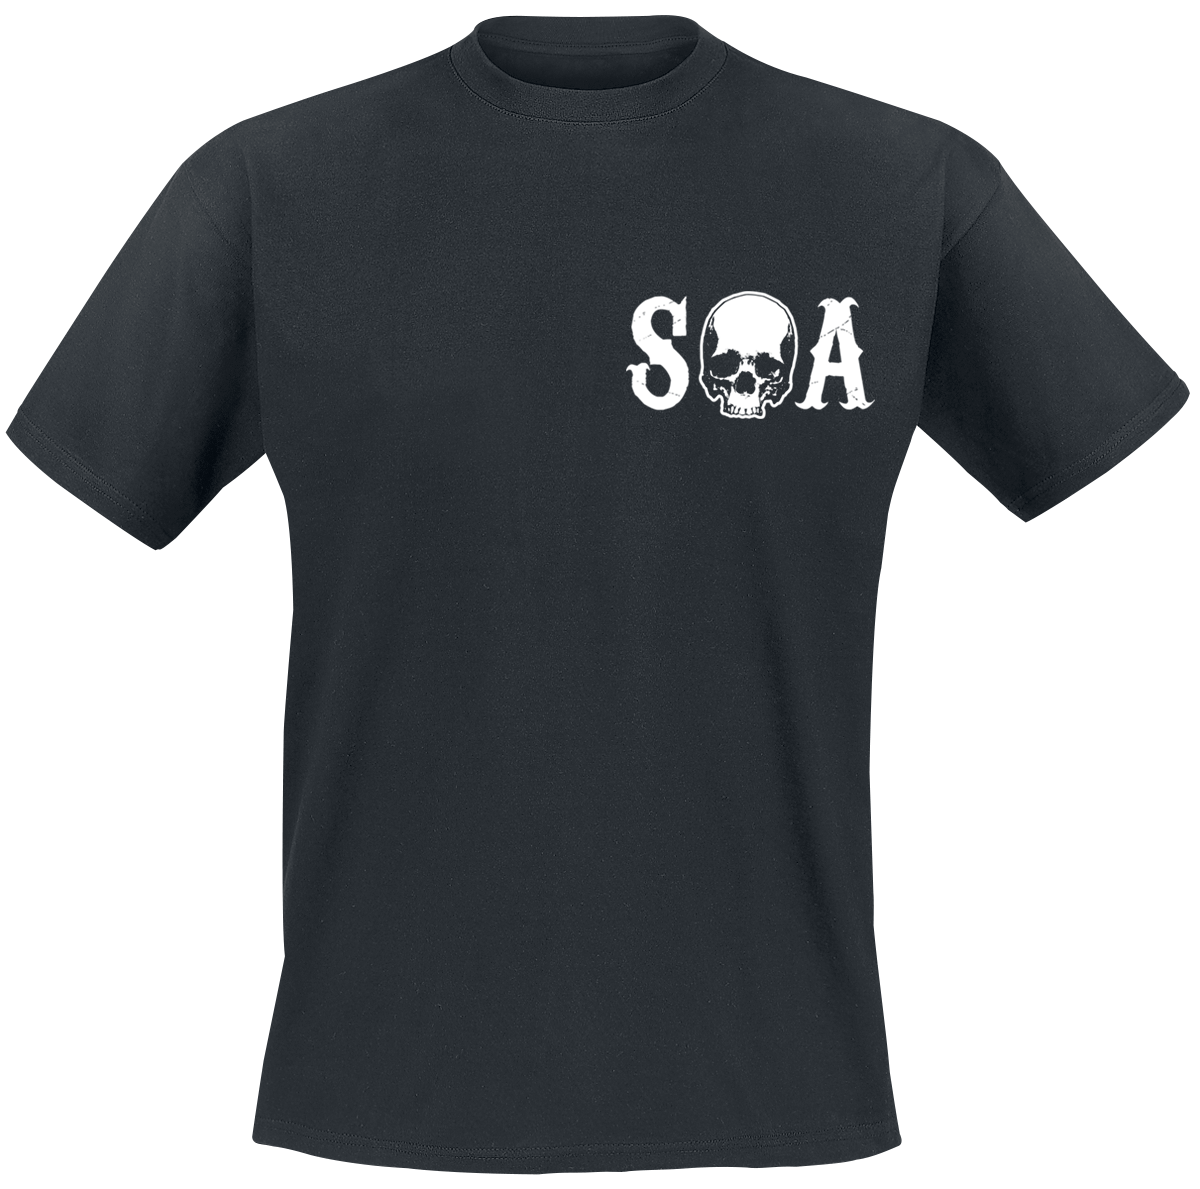 Sons Of Anarchy -  - T-Shirt - black image